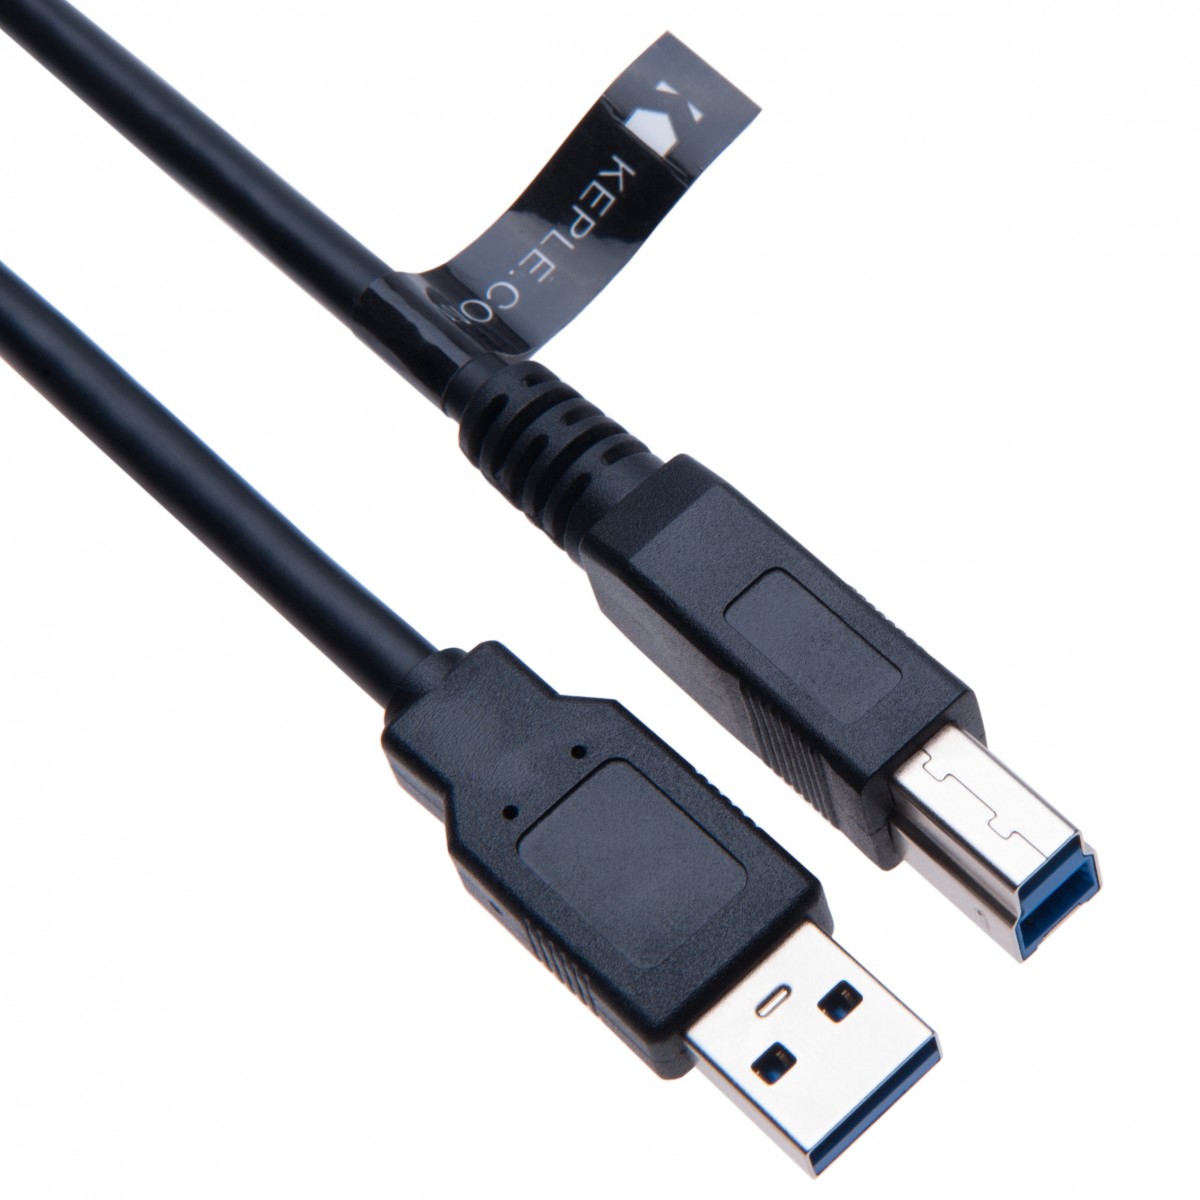 CN, Cable Length: 1m, Color: Black Computer Cables USB Cable High Speed USB 3.0 Interface Male to Male USB to USB Cable Adapter Error-Free Data Transfer Cable 